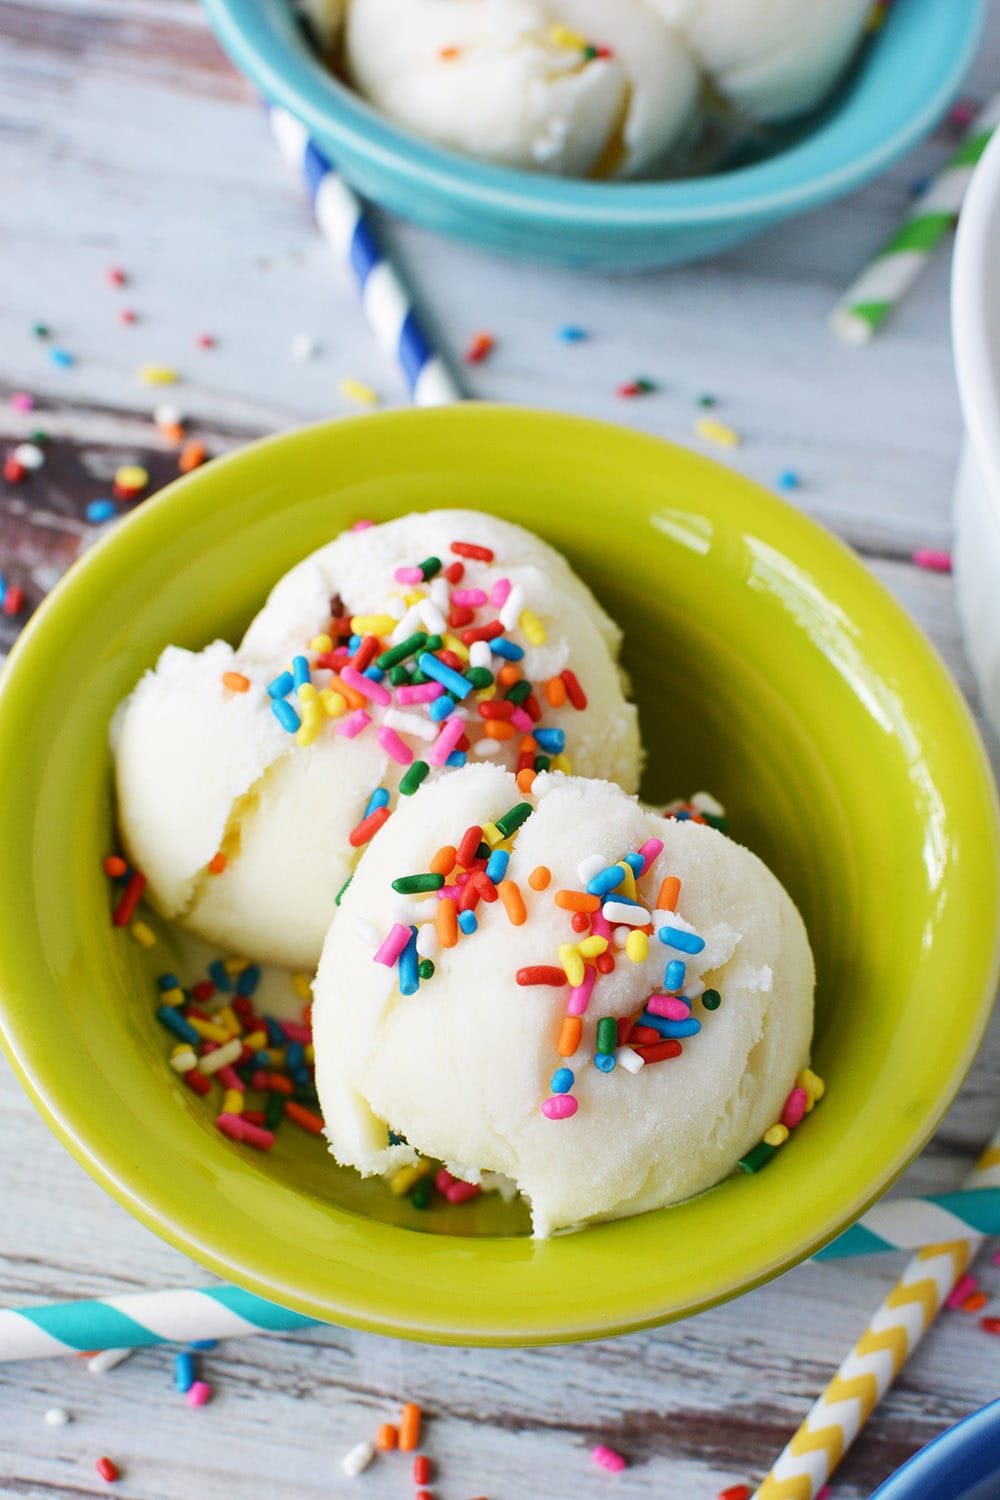 Birthday cake ice cream topped with sprinkles in a green bowl.